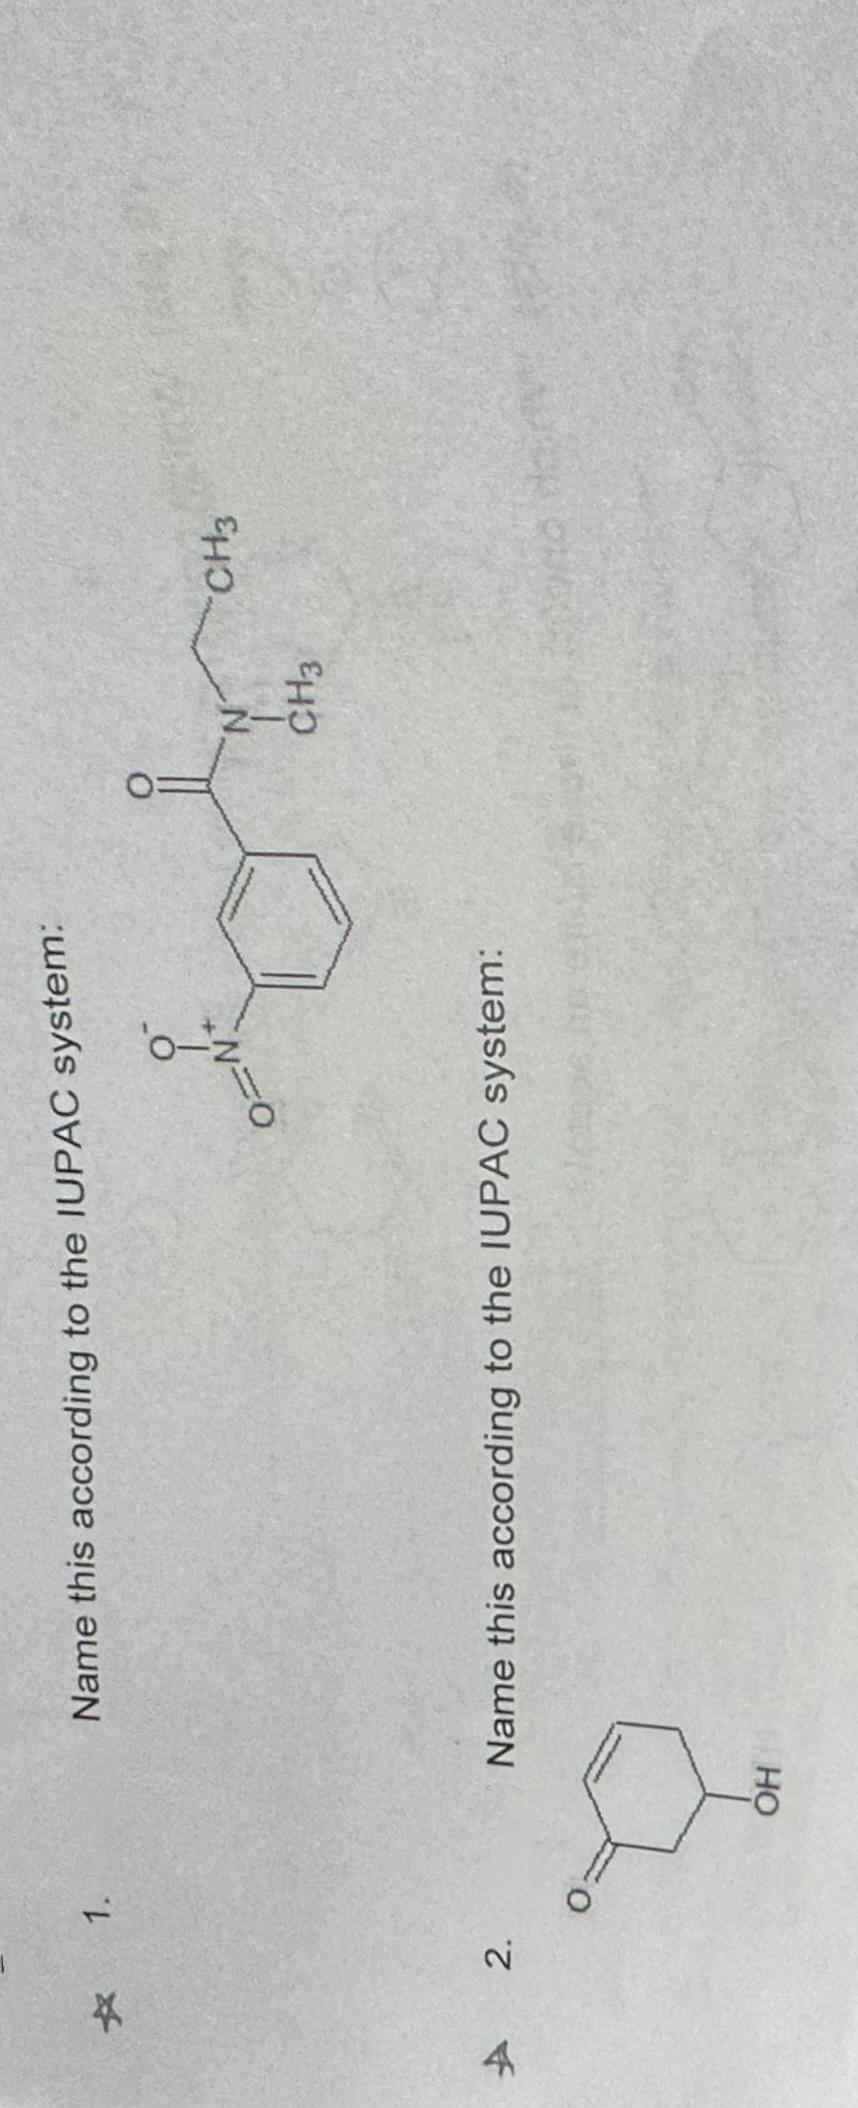 4
*
2.
1.
Name this according to the IUPAC system:
OH
ON
Name this according to the IUPAC system:
O
N
CH3
CH3